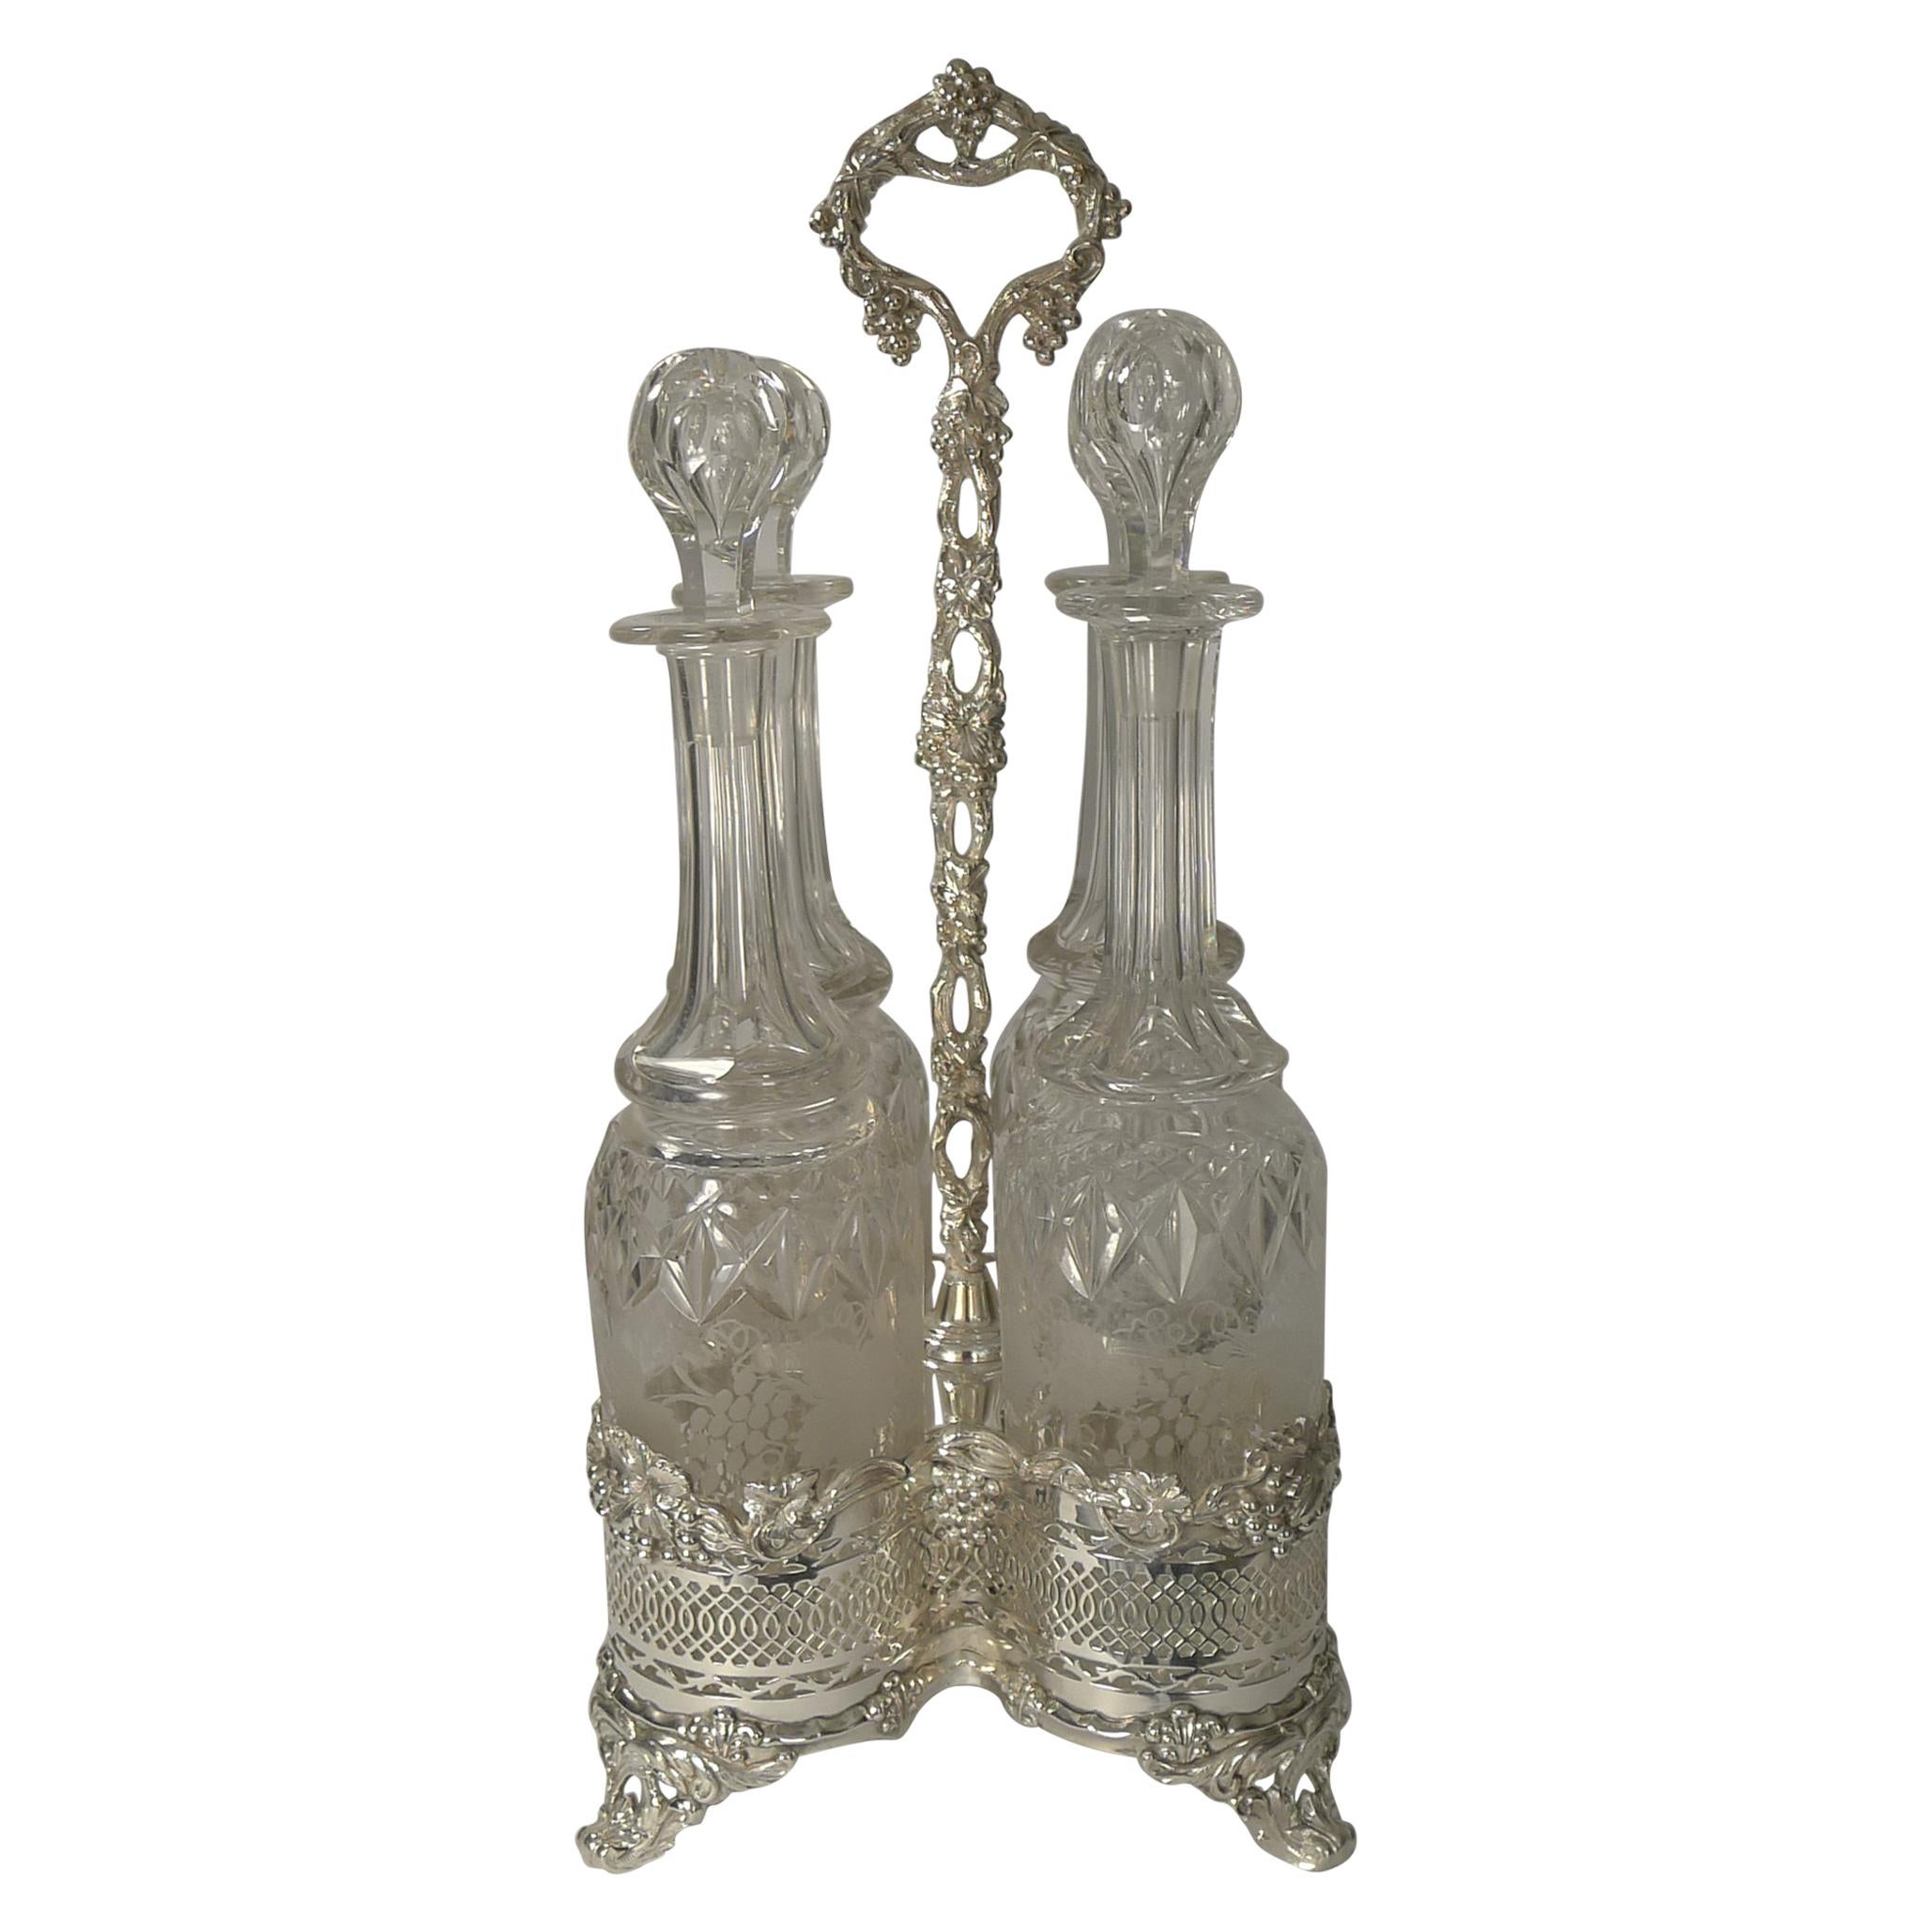 Four Antique English Wine Decanters in Stand, circa 1890